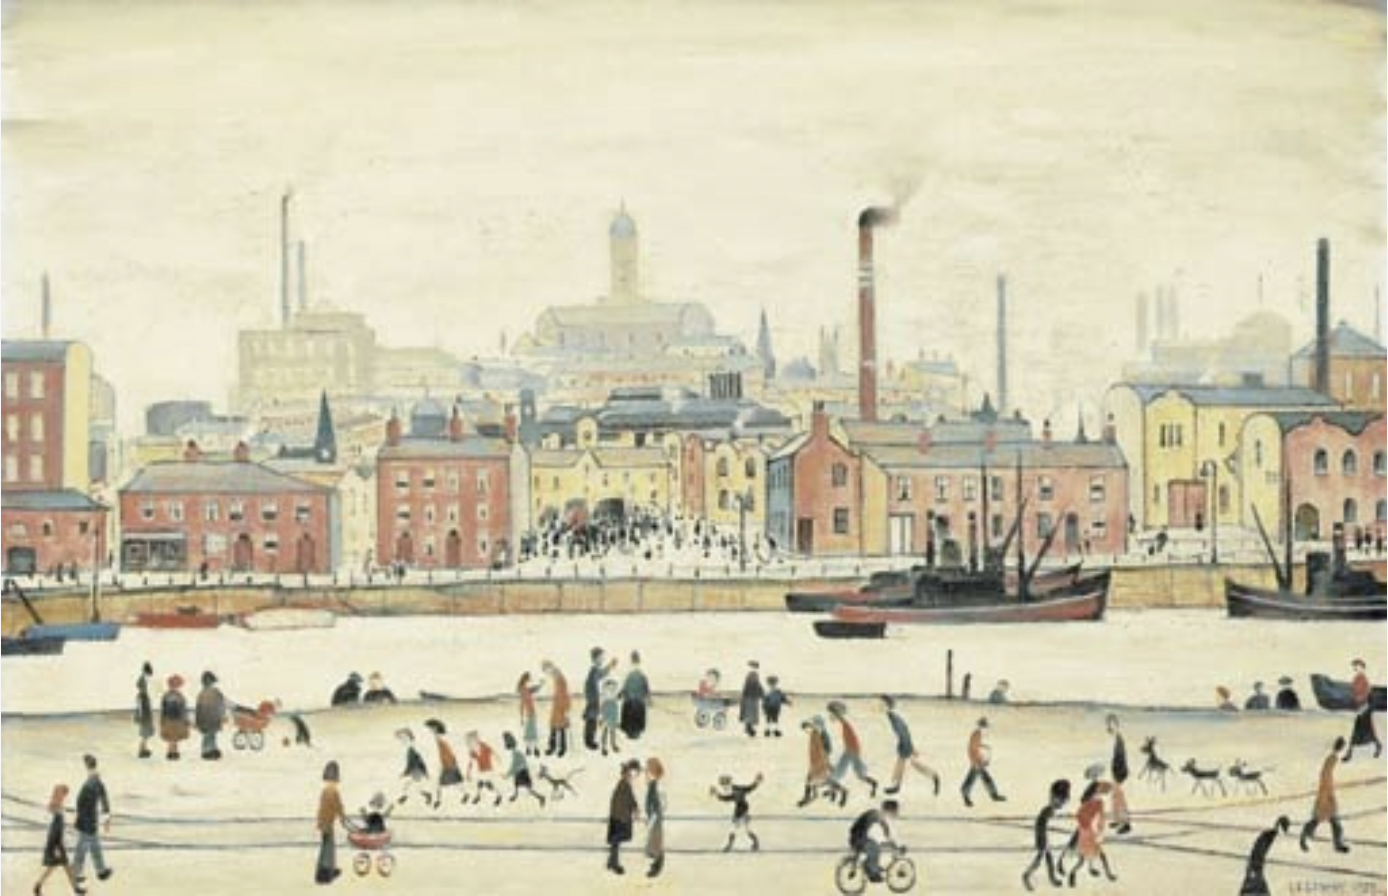 Northern River Scene (1959) by Laurence Stephen Lowry (1887 - 1976), English artist.